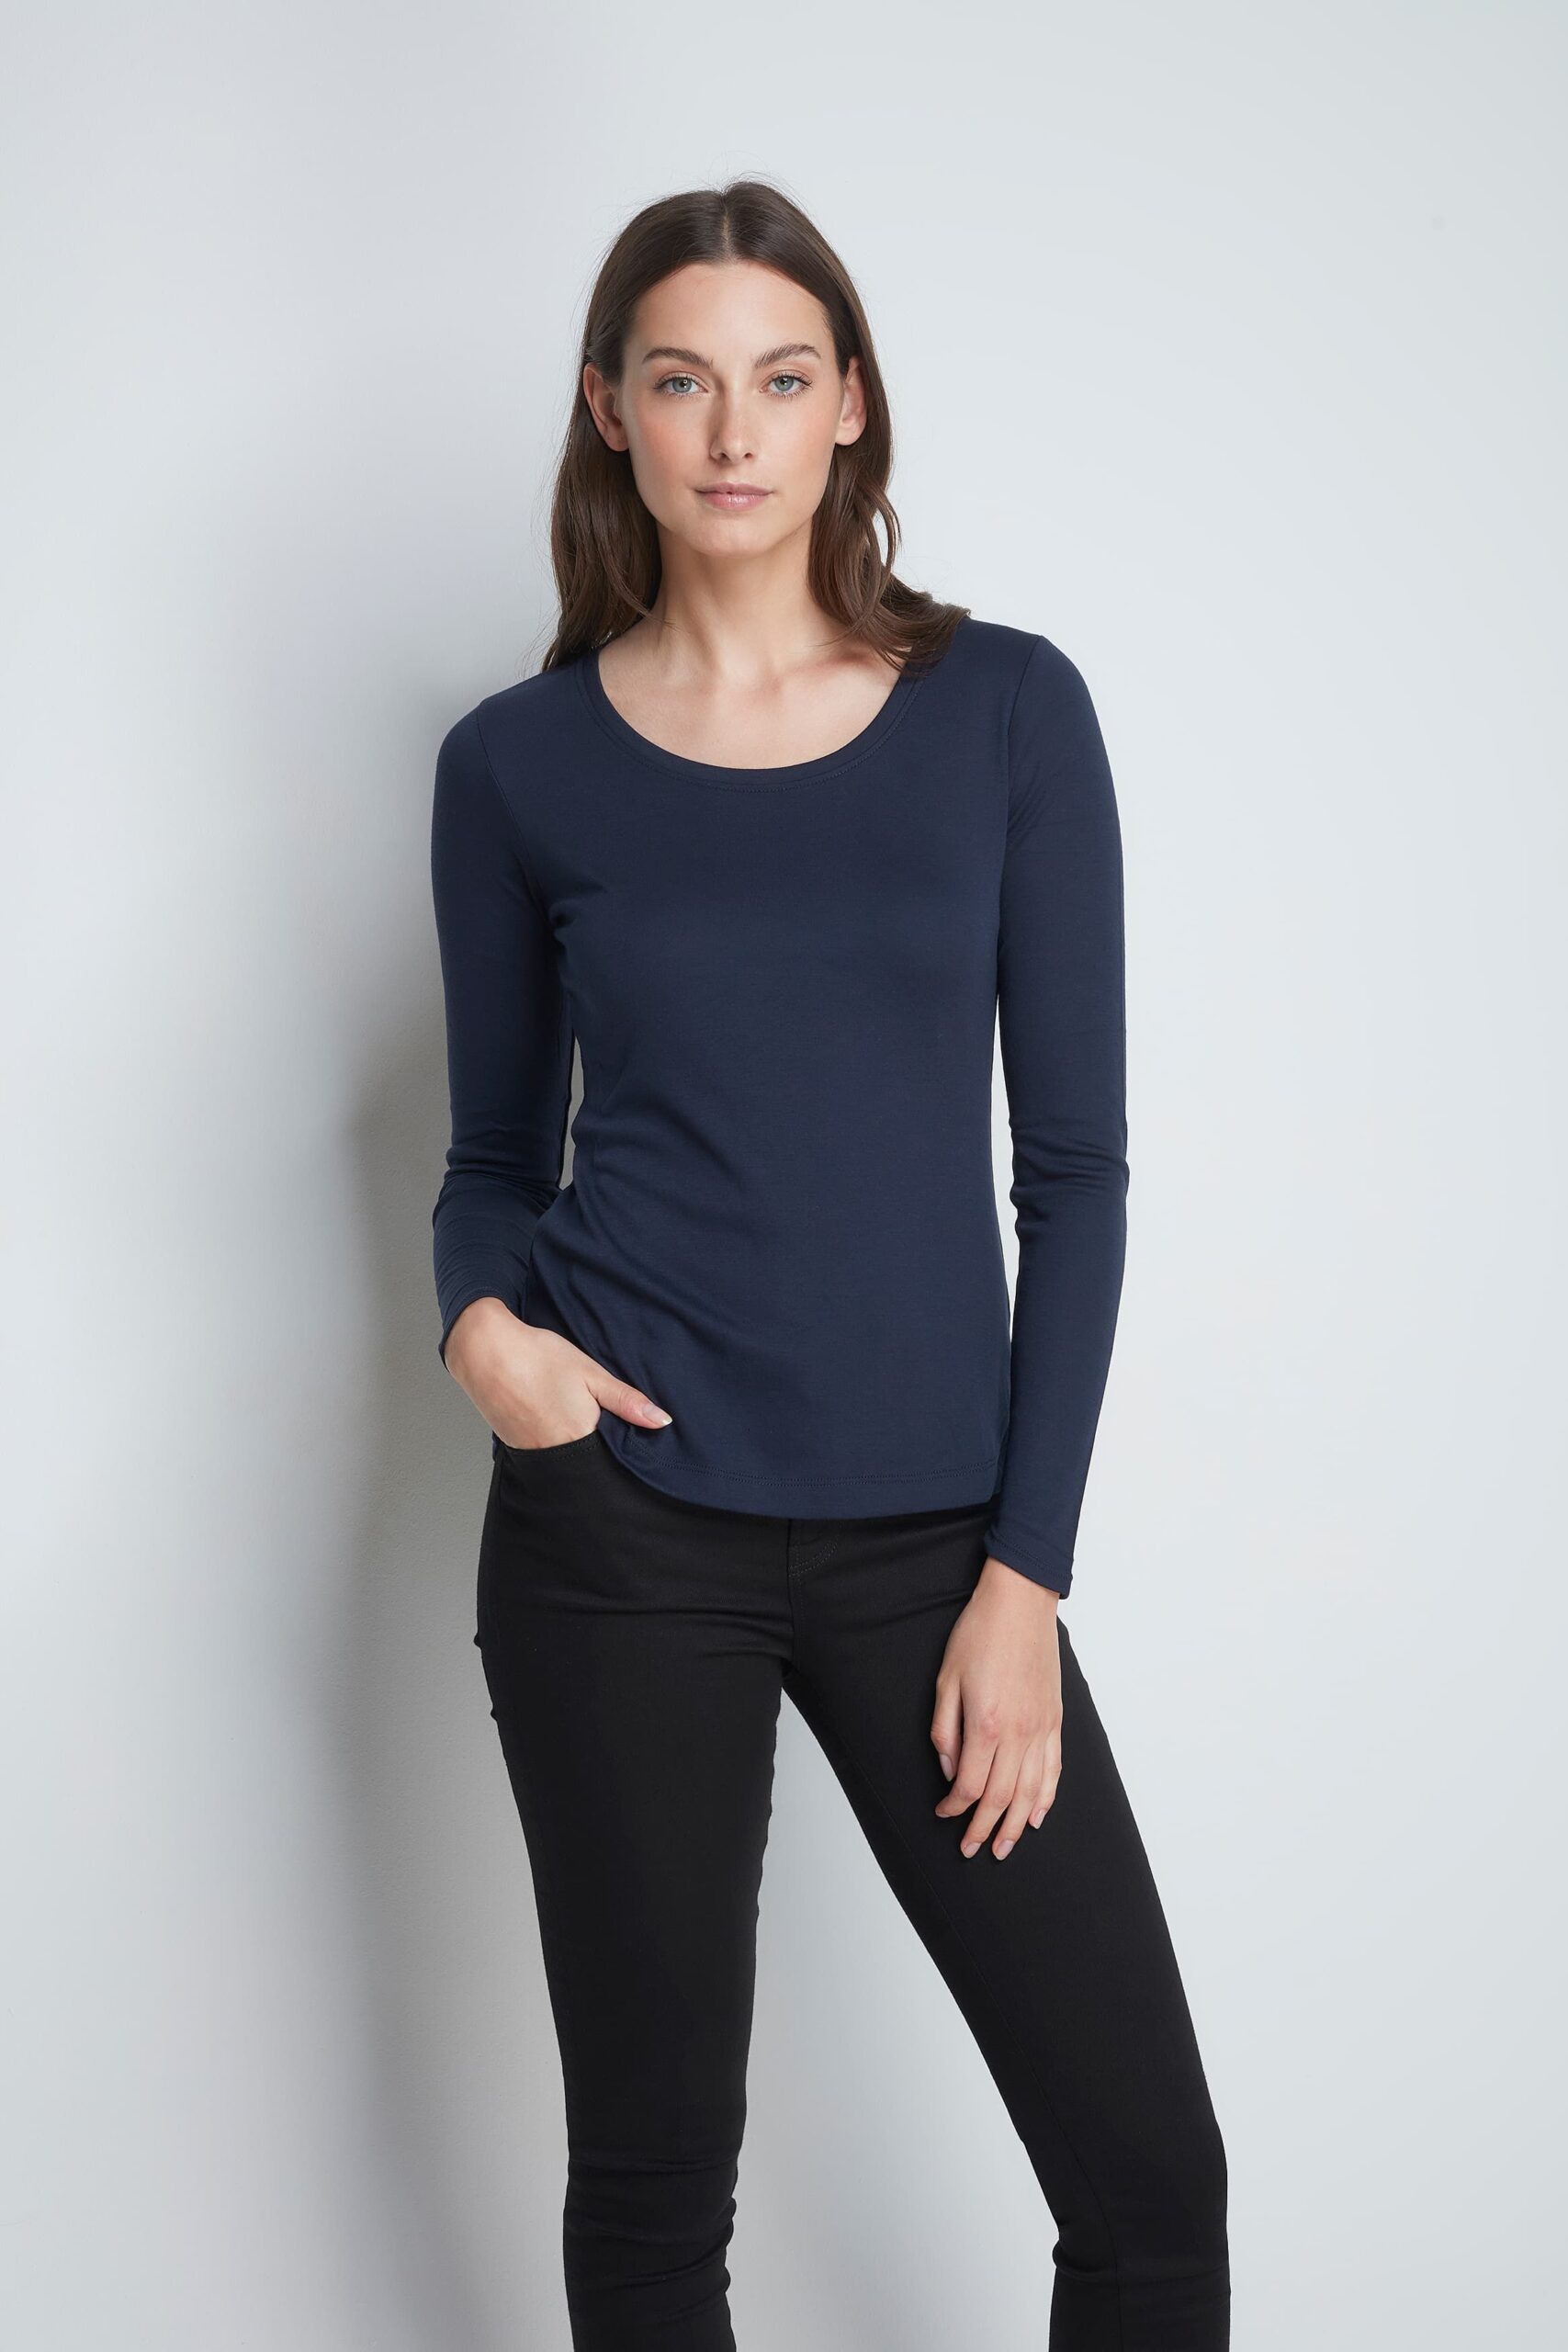 Attractive and elegant long sleeve t
shirt